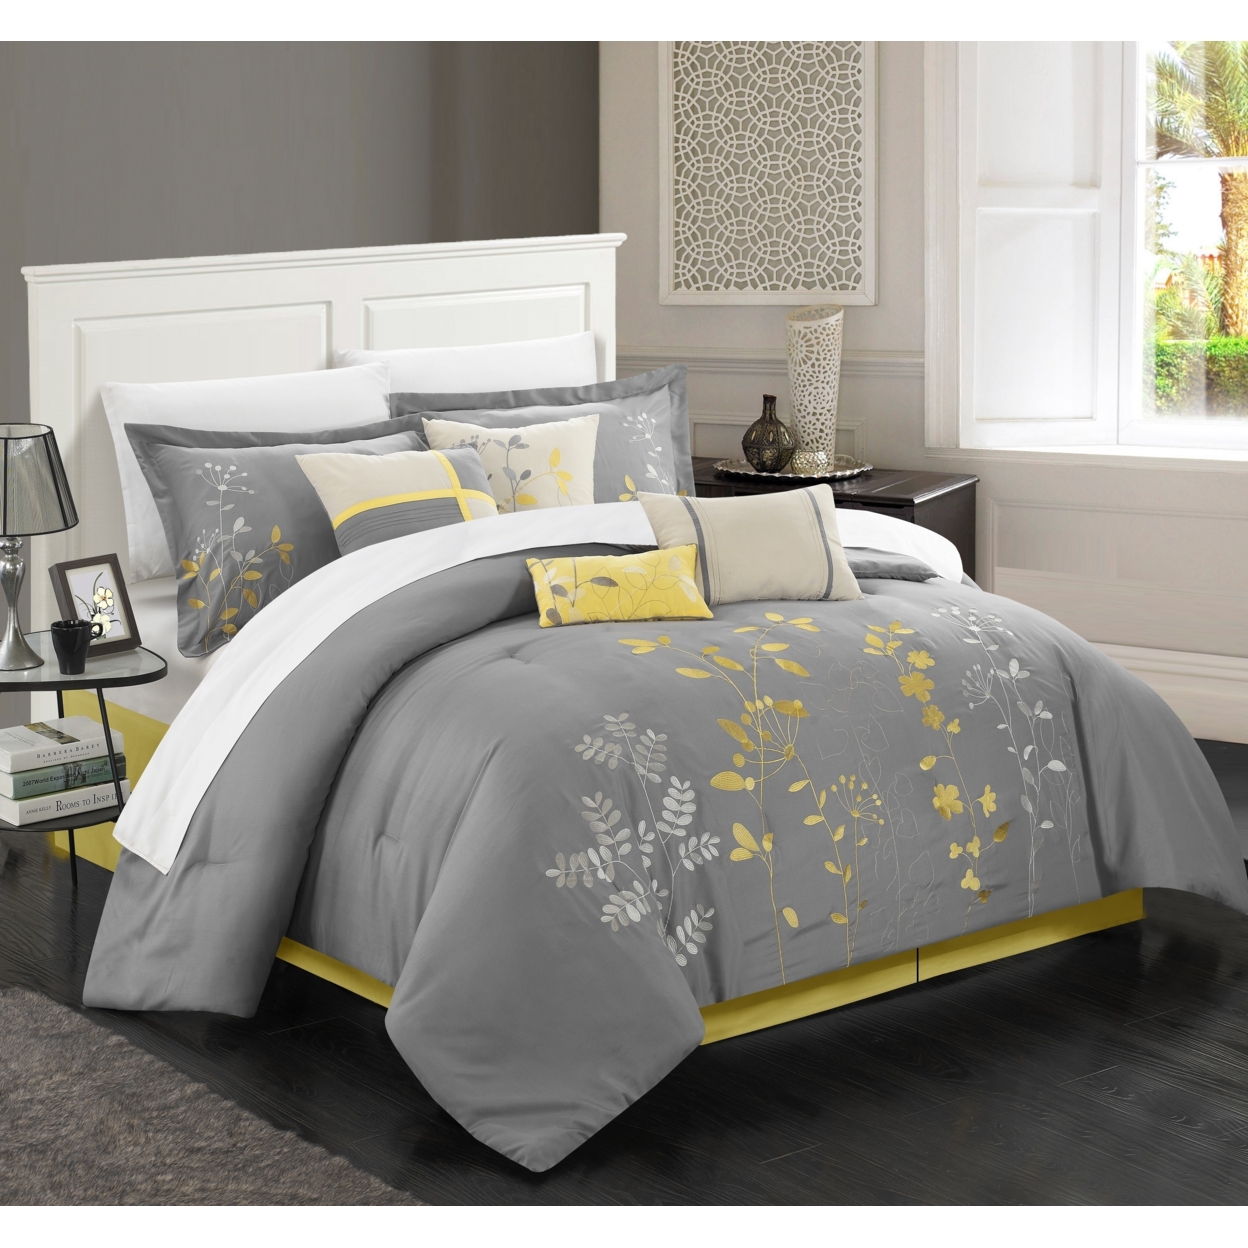 Brooke 8-Piece Embroidered Bed Comforter Set - Yellow, Queen